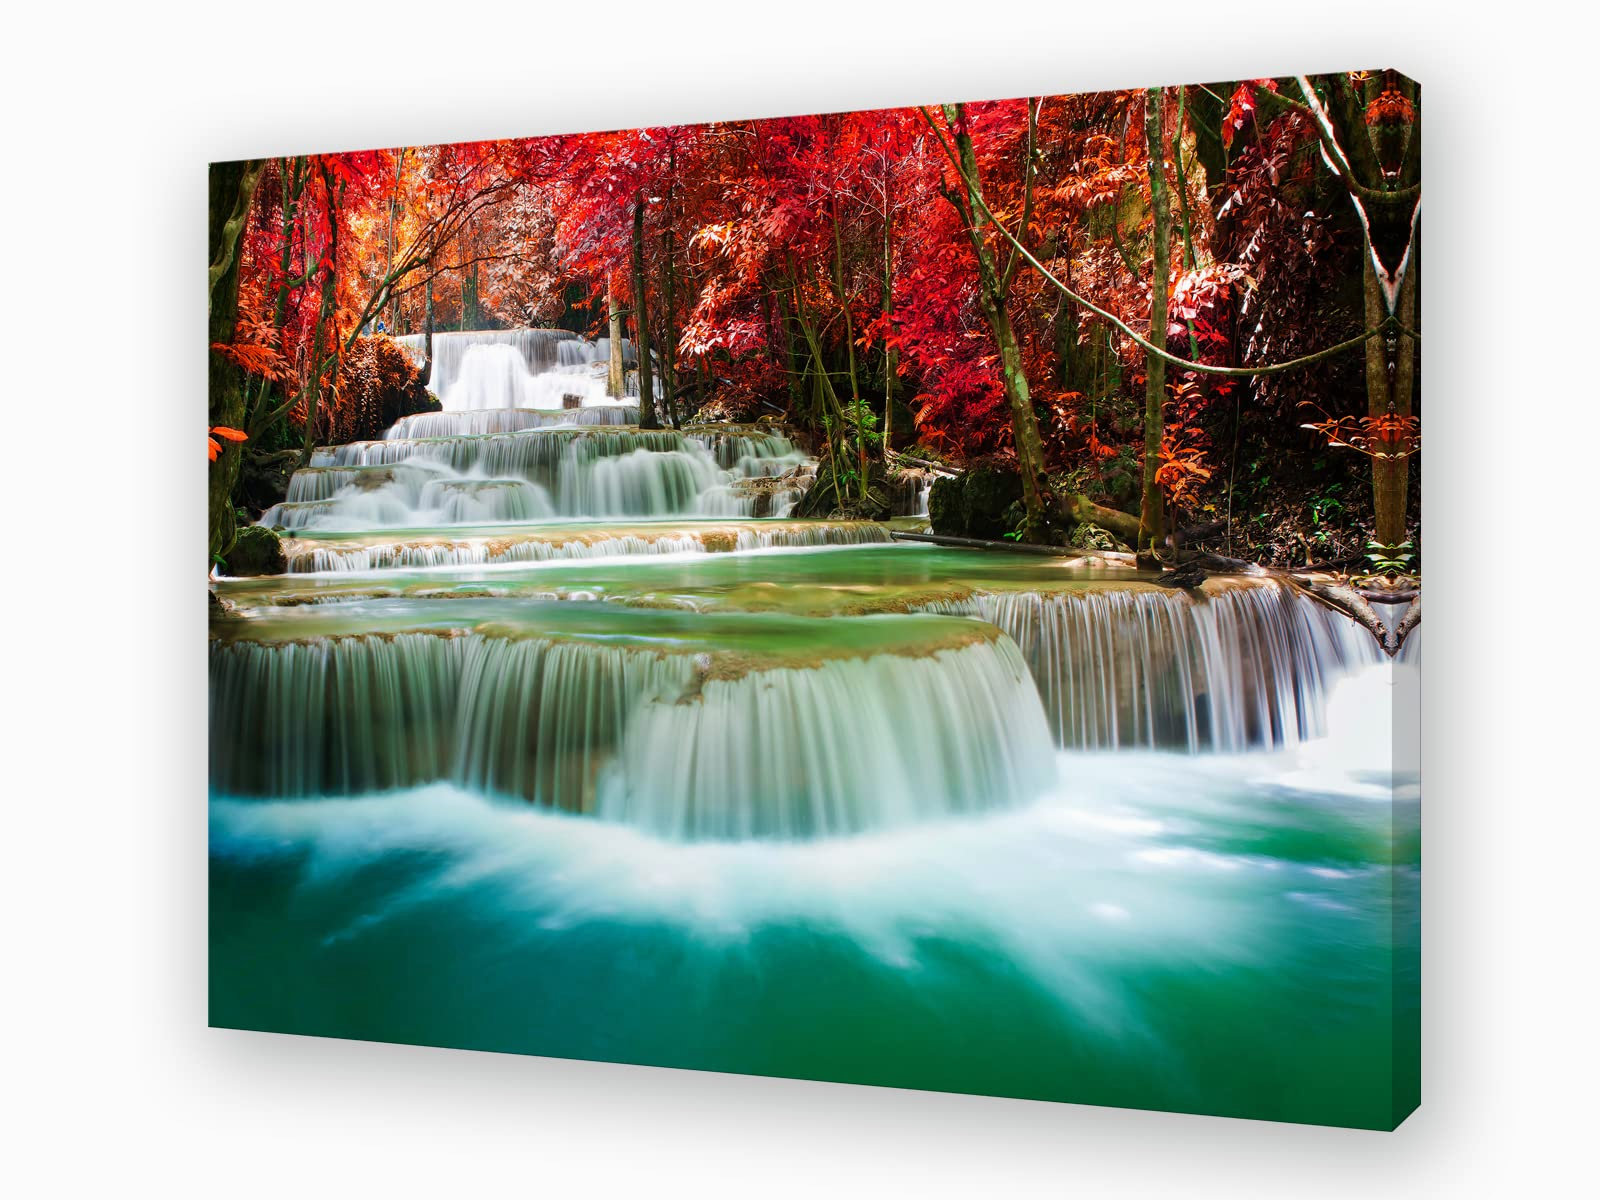 Wall print landscape scene waterfall picture poster and prints canvas painting 